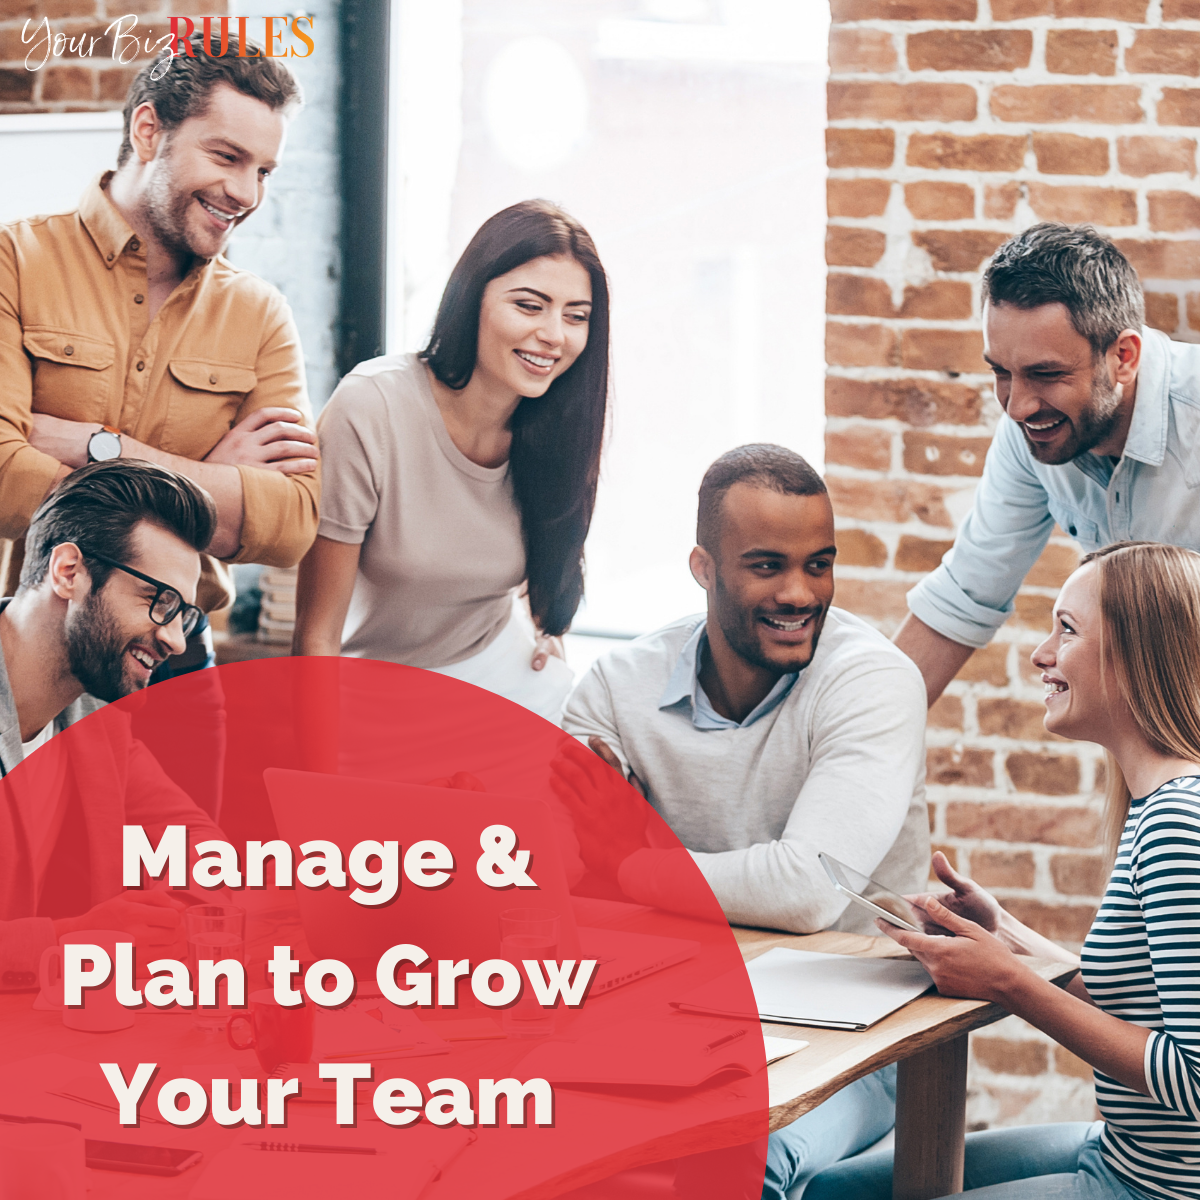 Manage & Plan to Grow Your Team